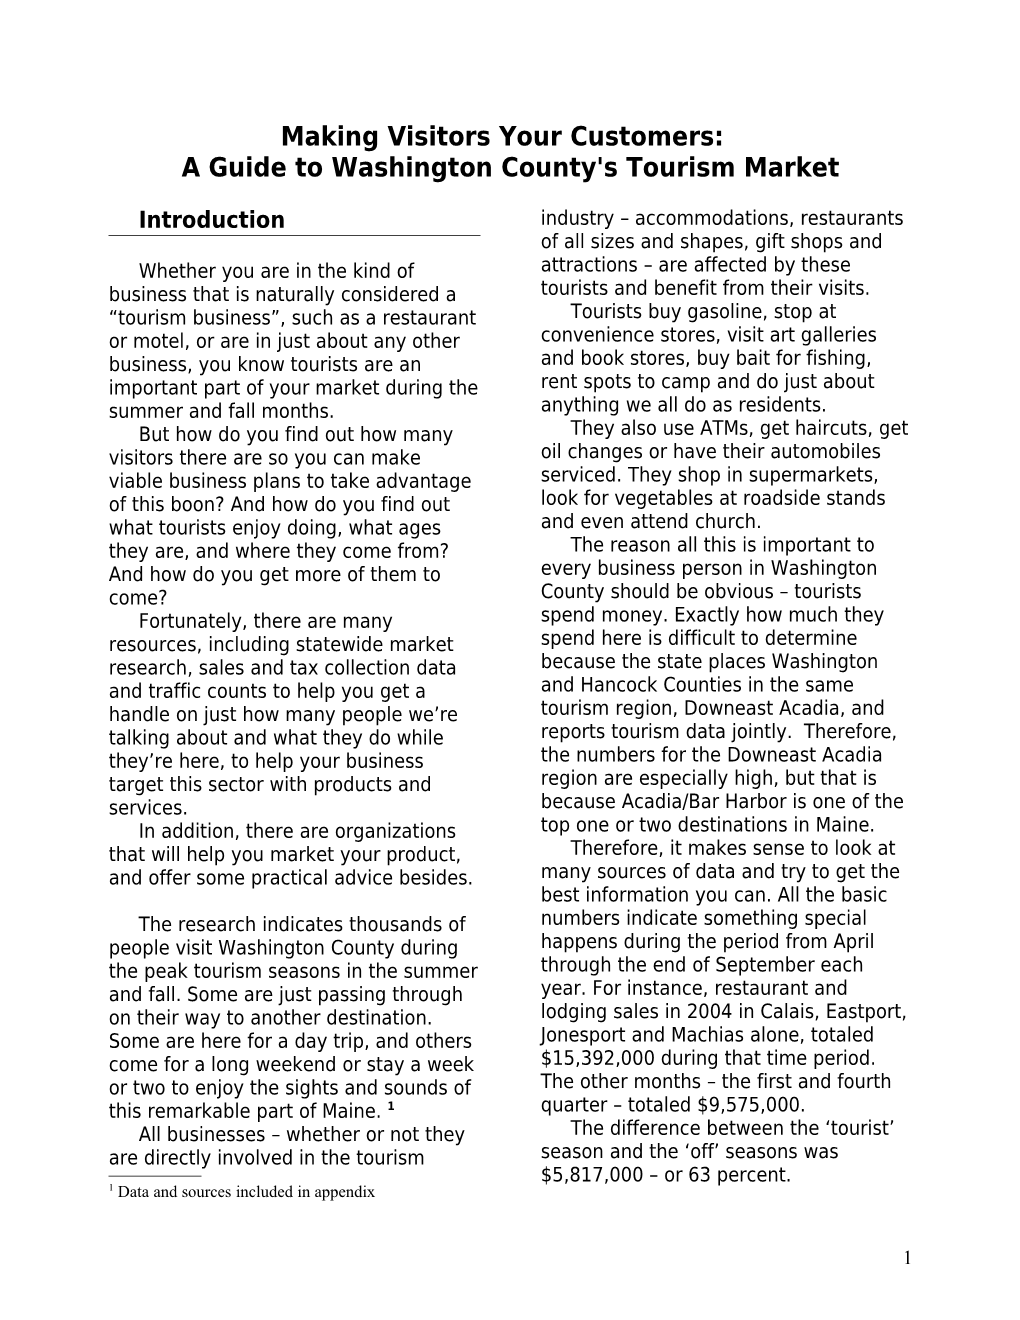 Expanded Outline: the Tourism Market in Washington County and How You Can Find Profit in It